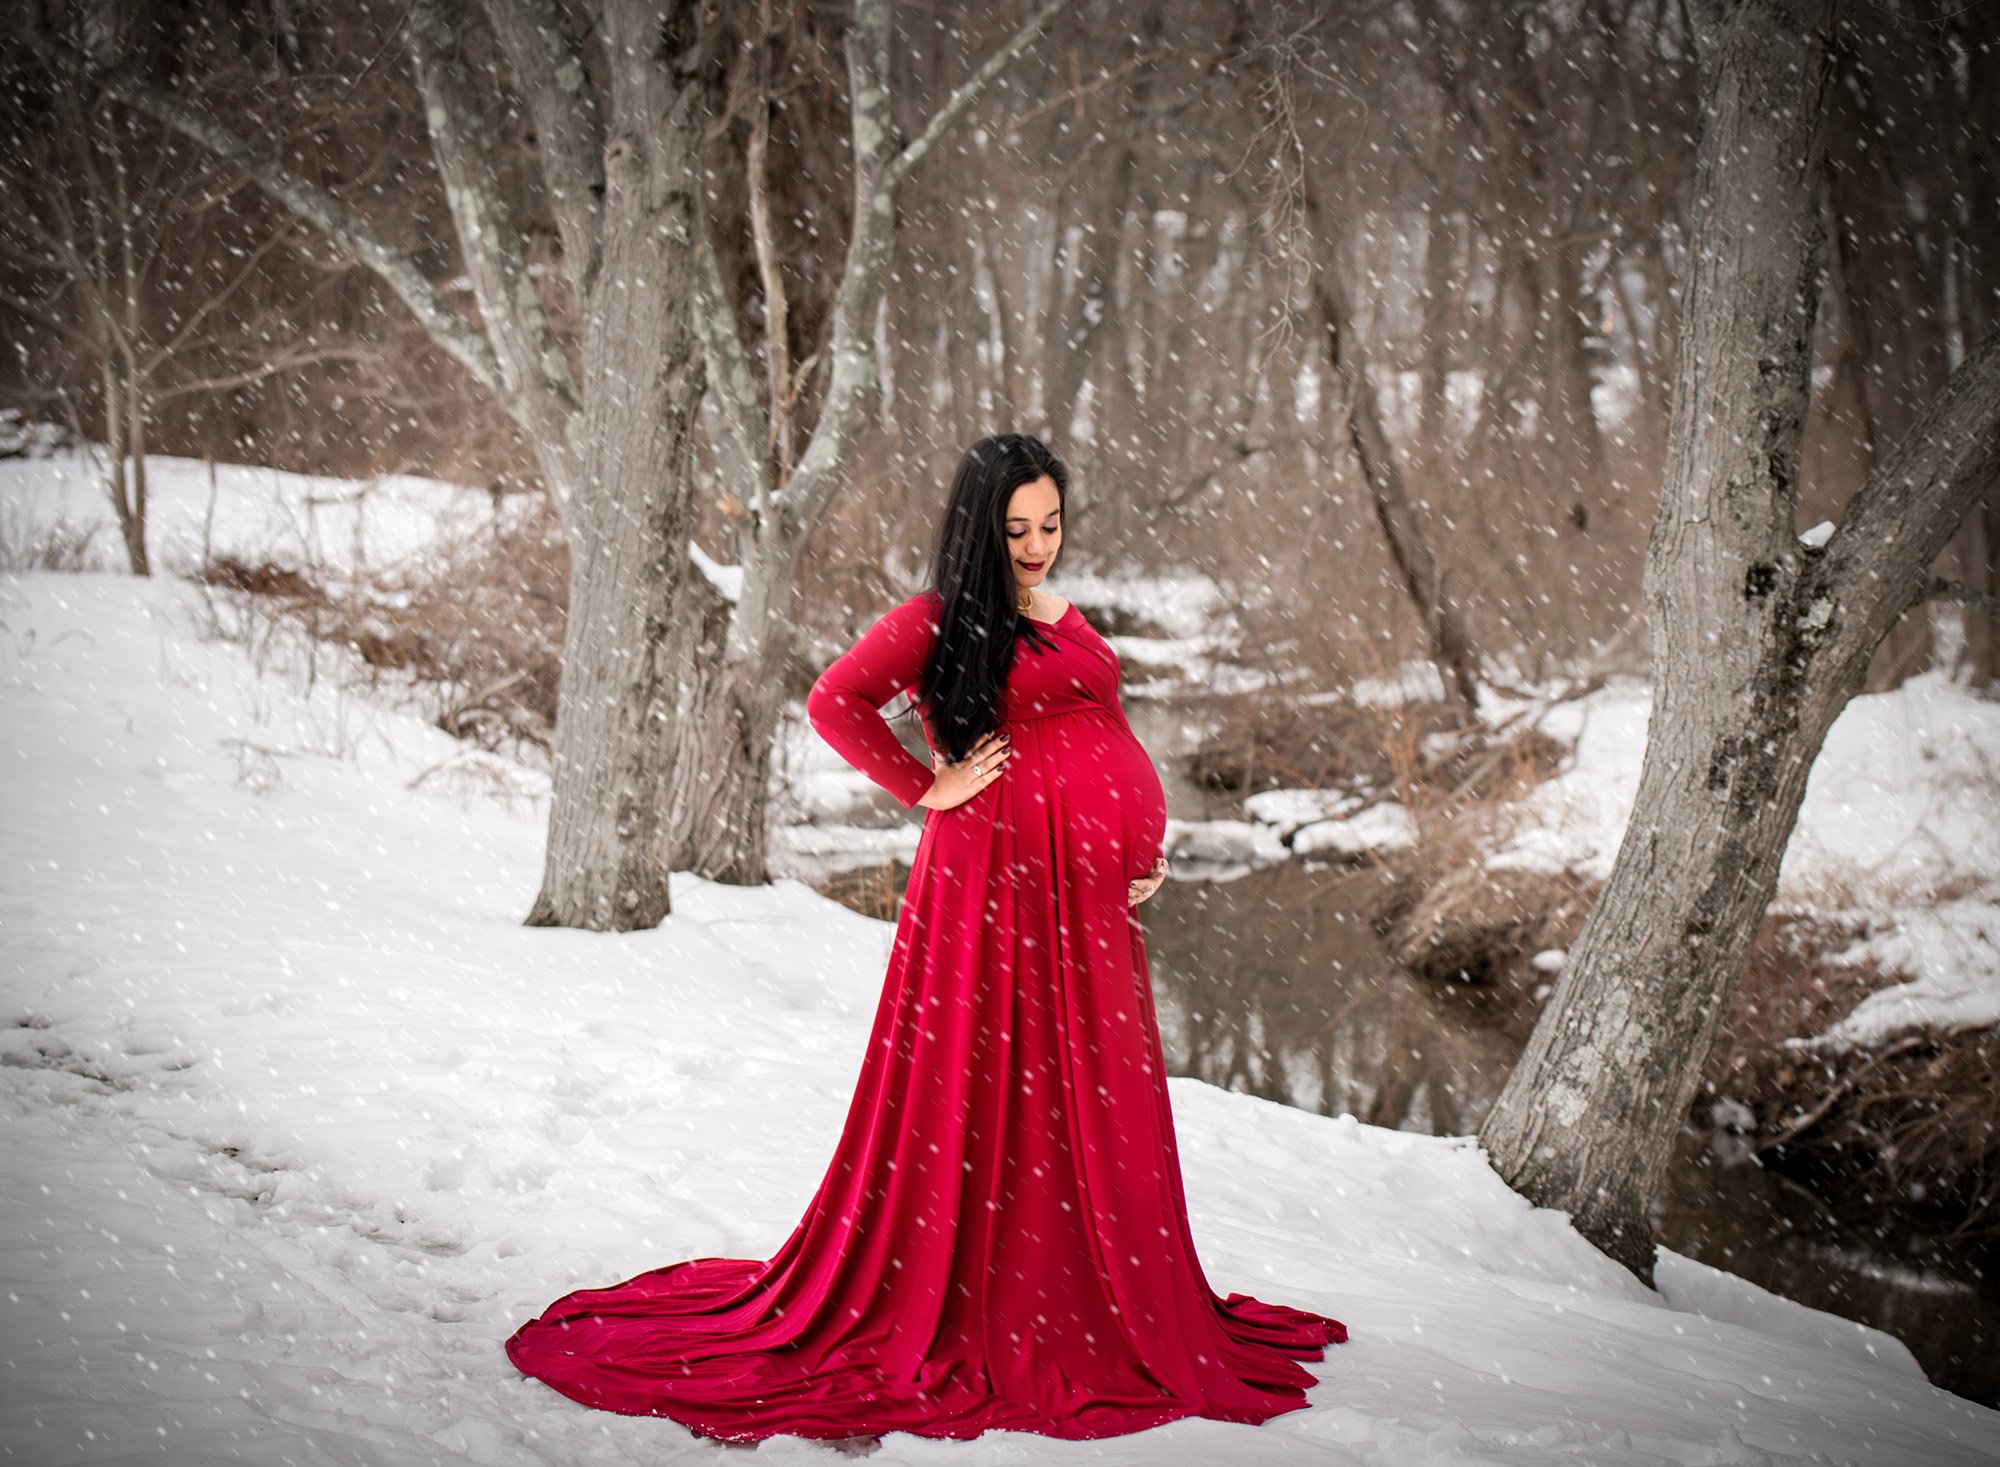 red maternity gown by the stream with snowflakes falling around her